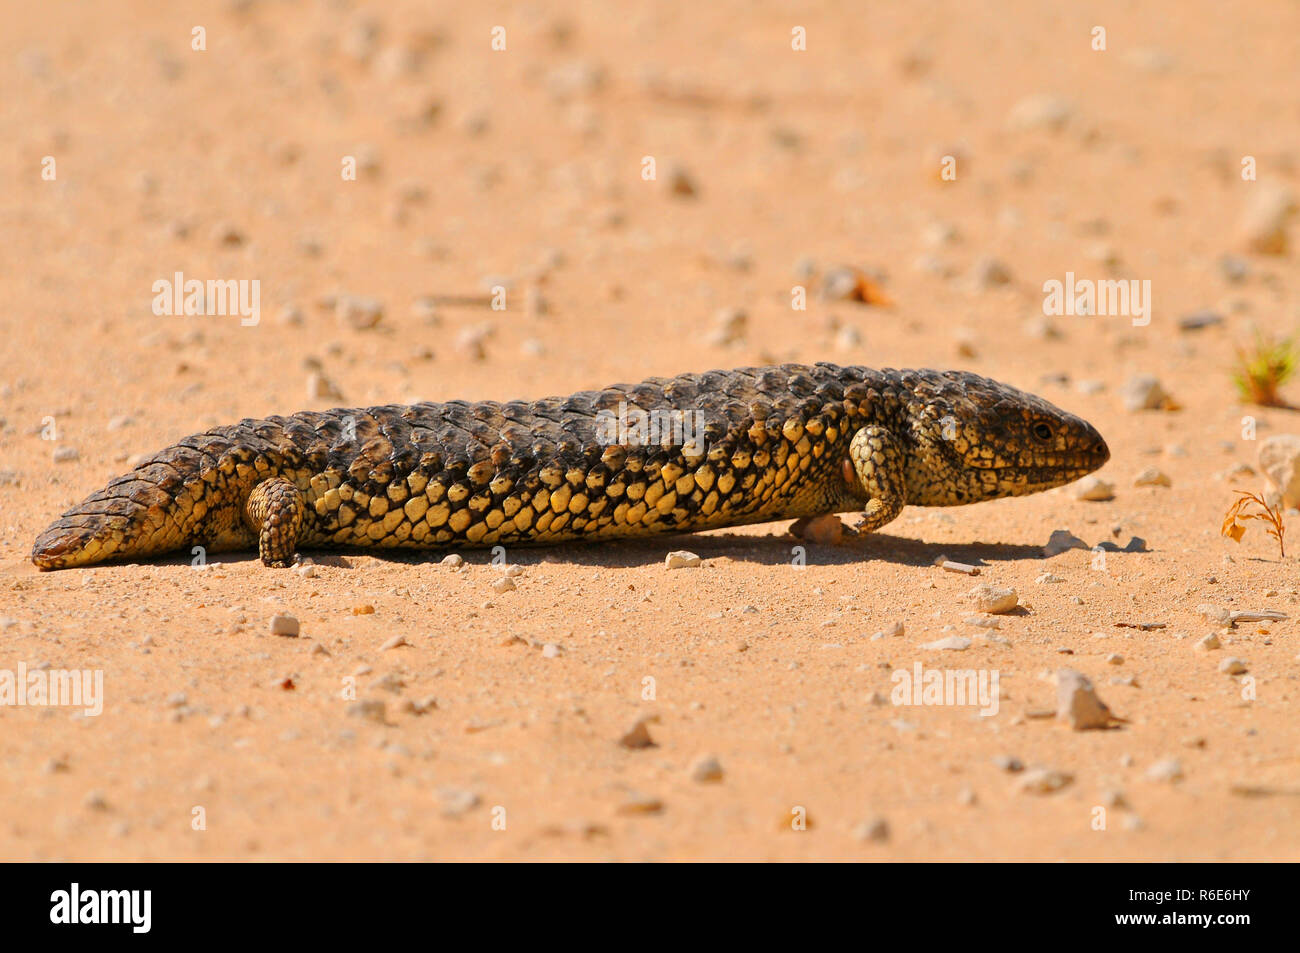 Tiliqua Rugosa (Eastern Shingleback) Is A Short-Tailed, Slow Moving Species Of Blue-Tongued Skink Found In Australia Coorong National Park Australia Stock Photo